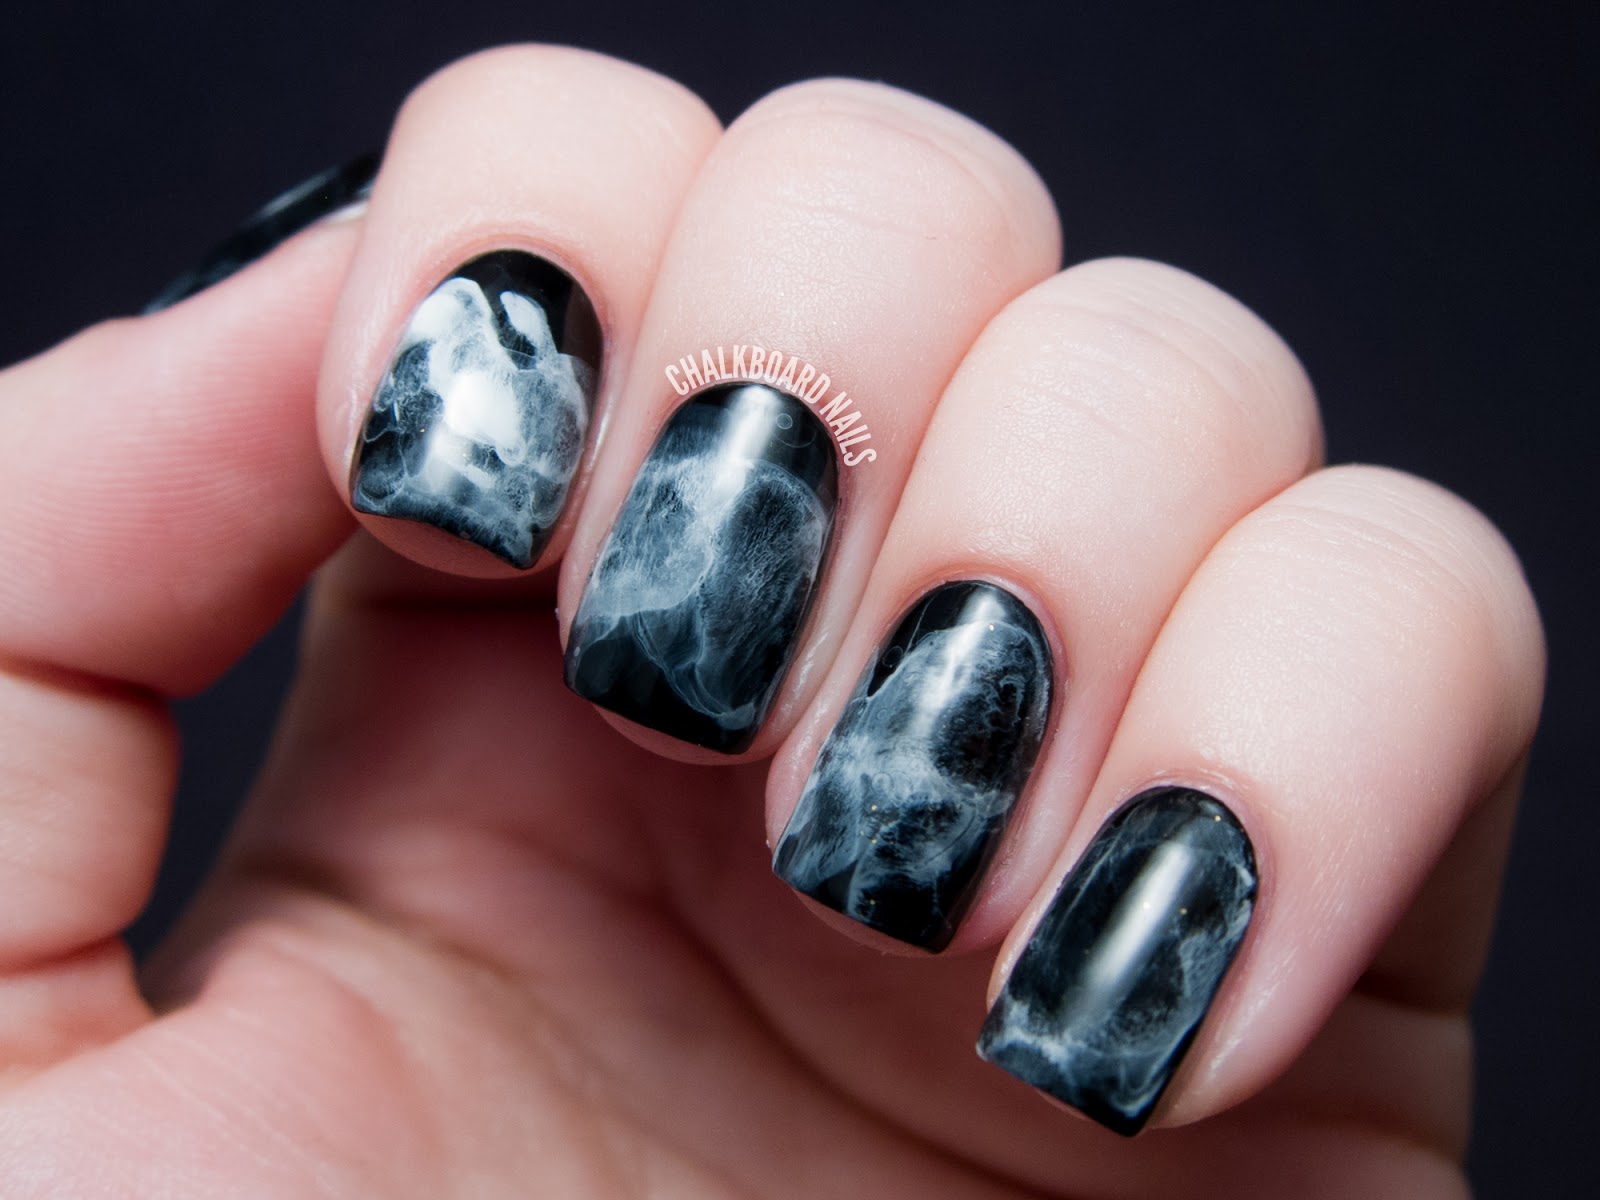 image of black and white nail design